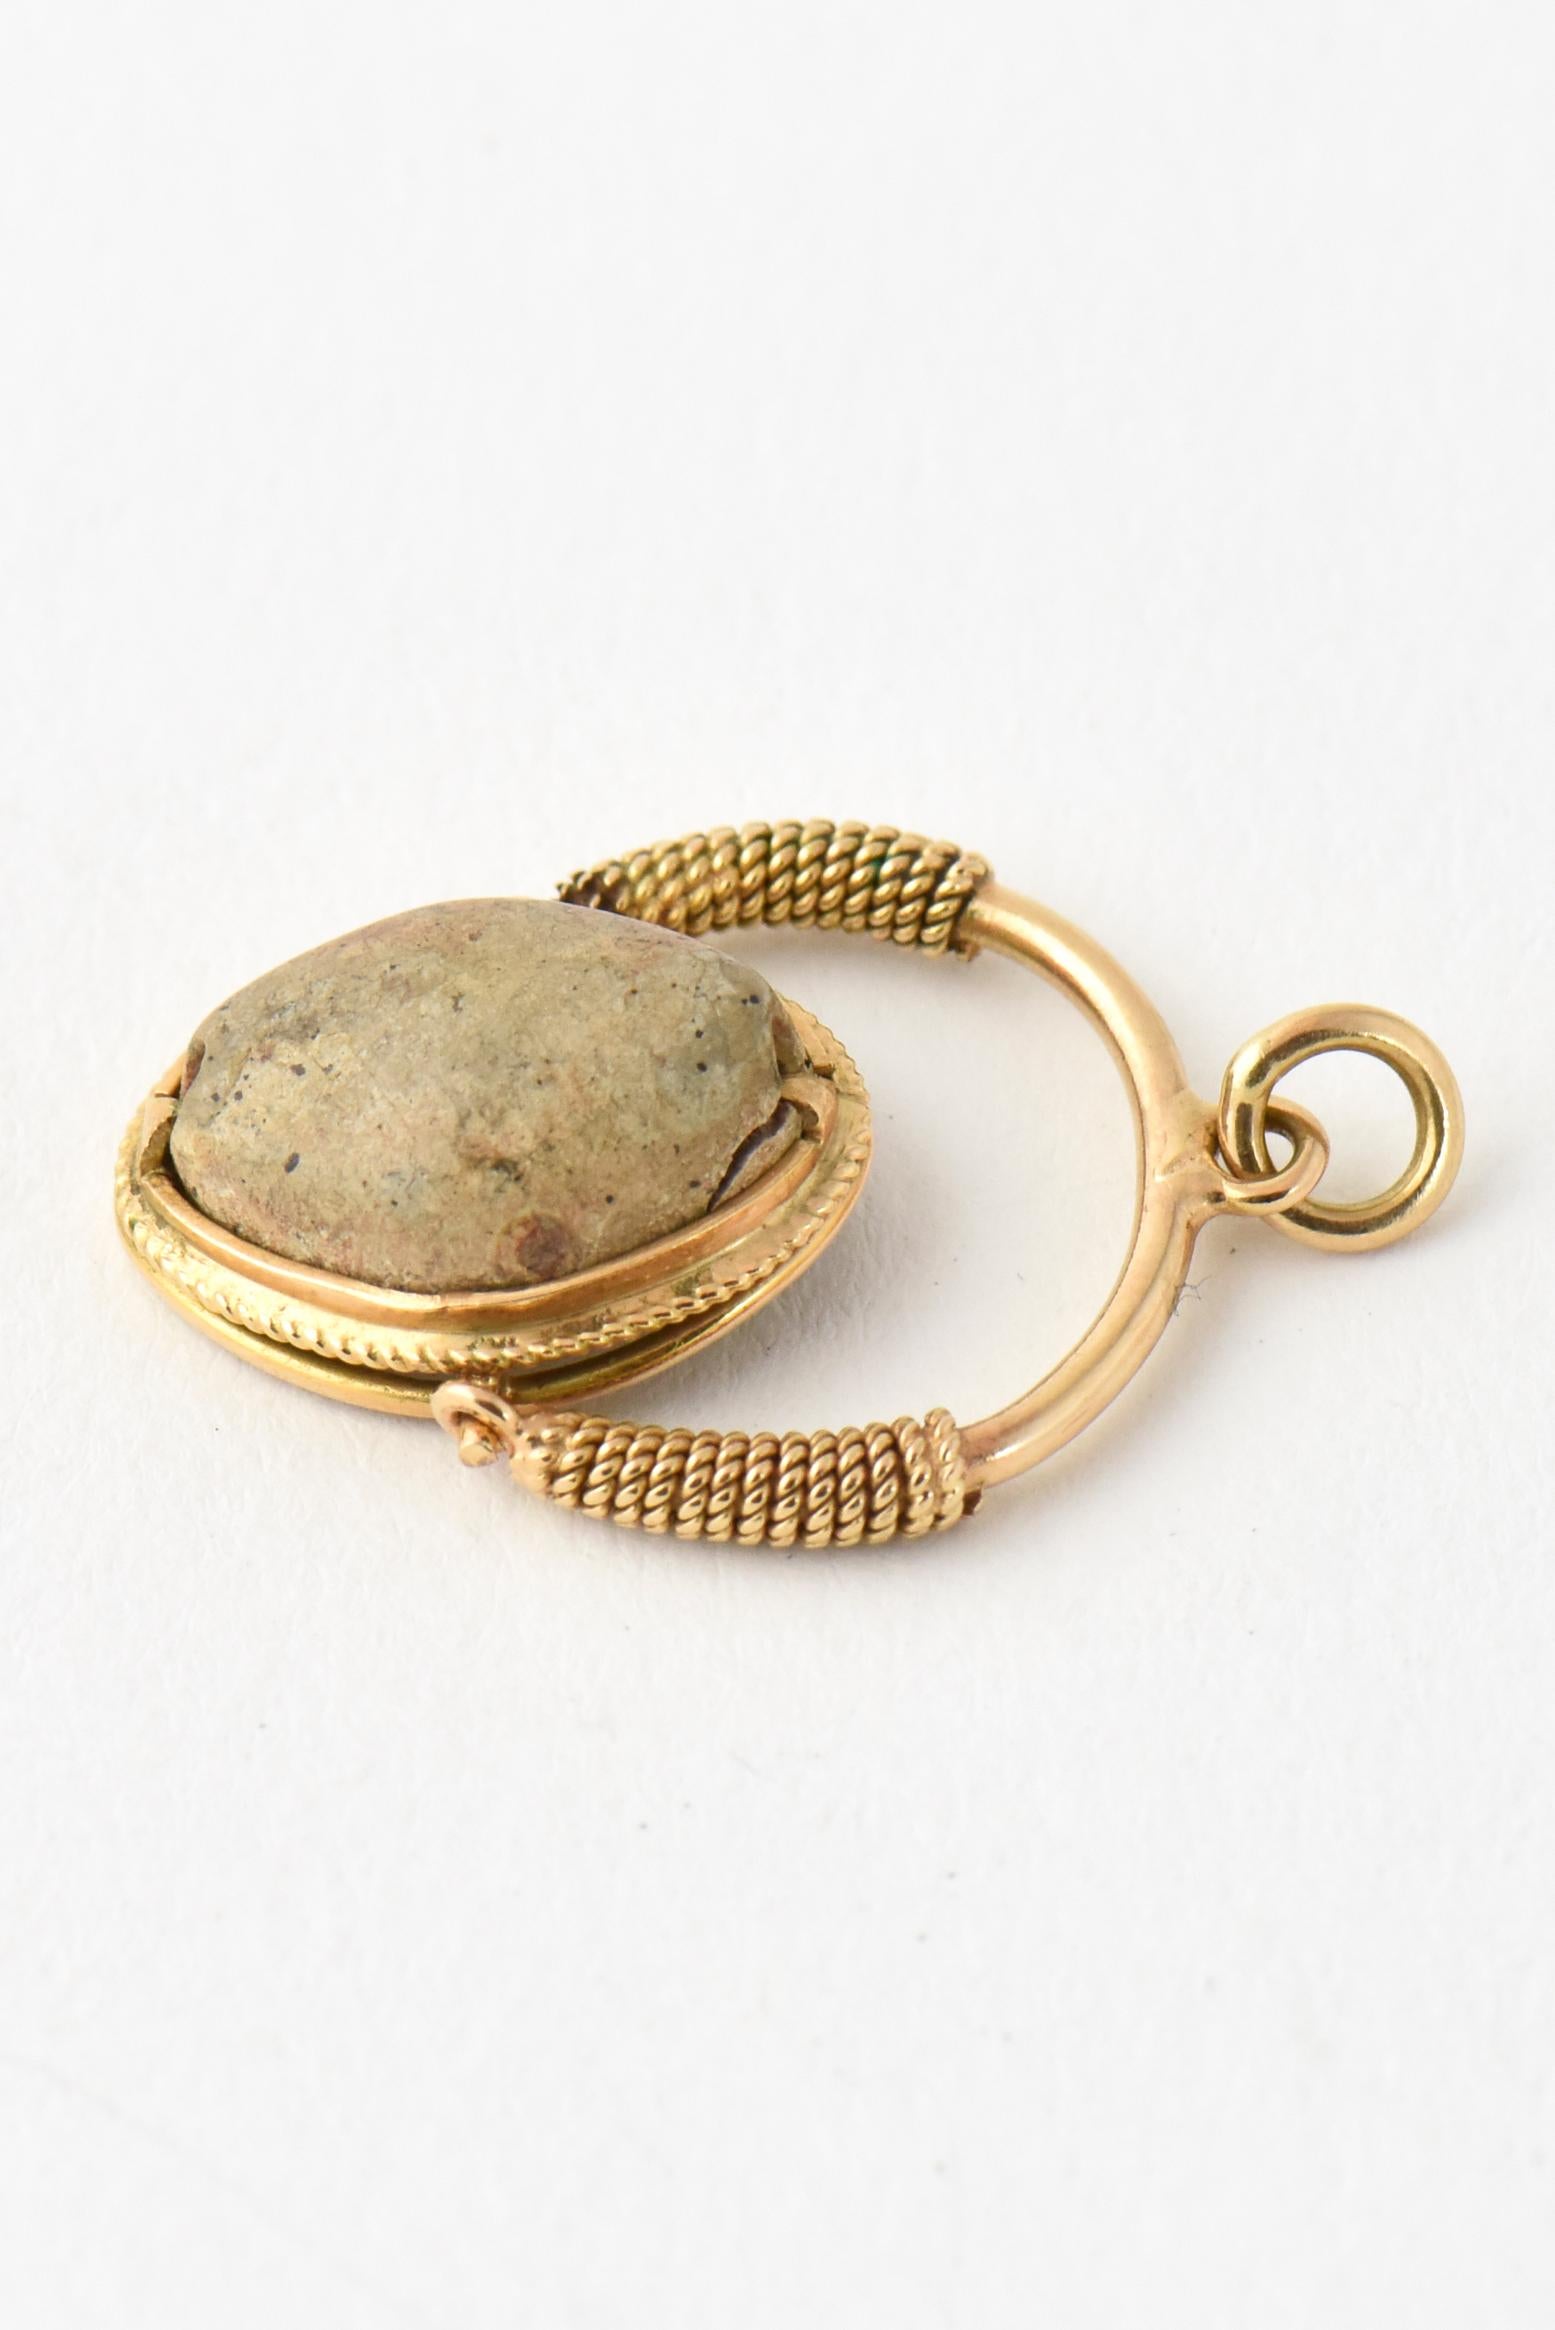 Antique 18k gold scarab pendant fob. Caving of a woman on the underside of scarab.